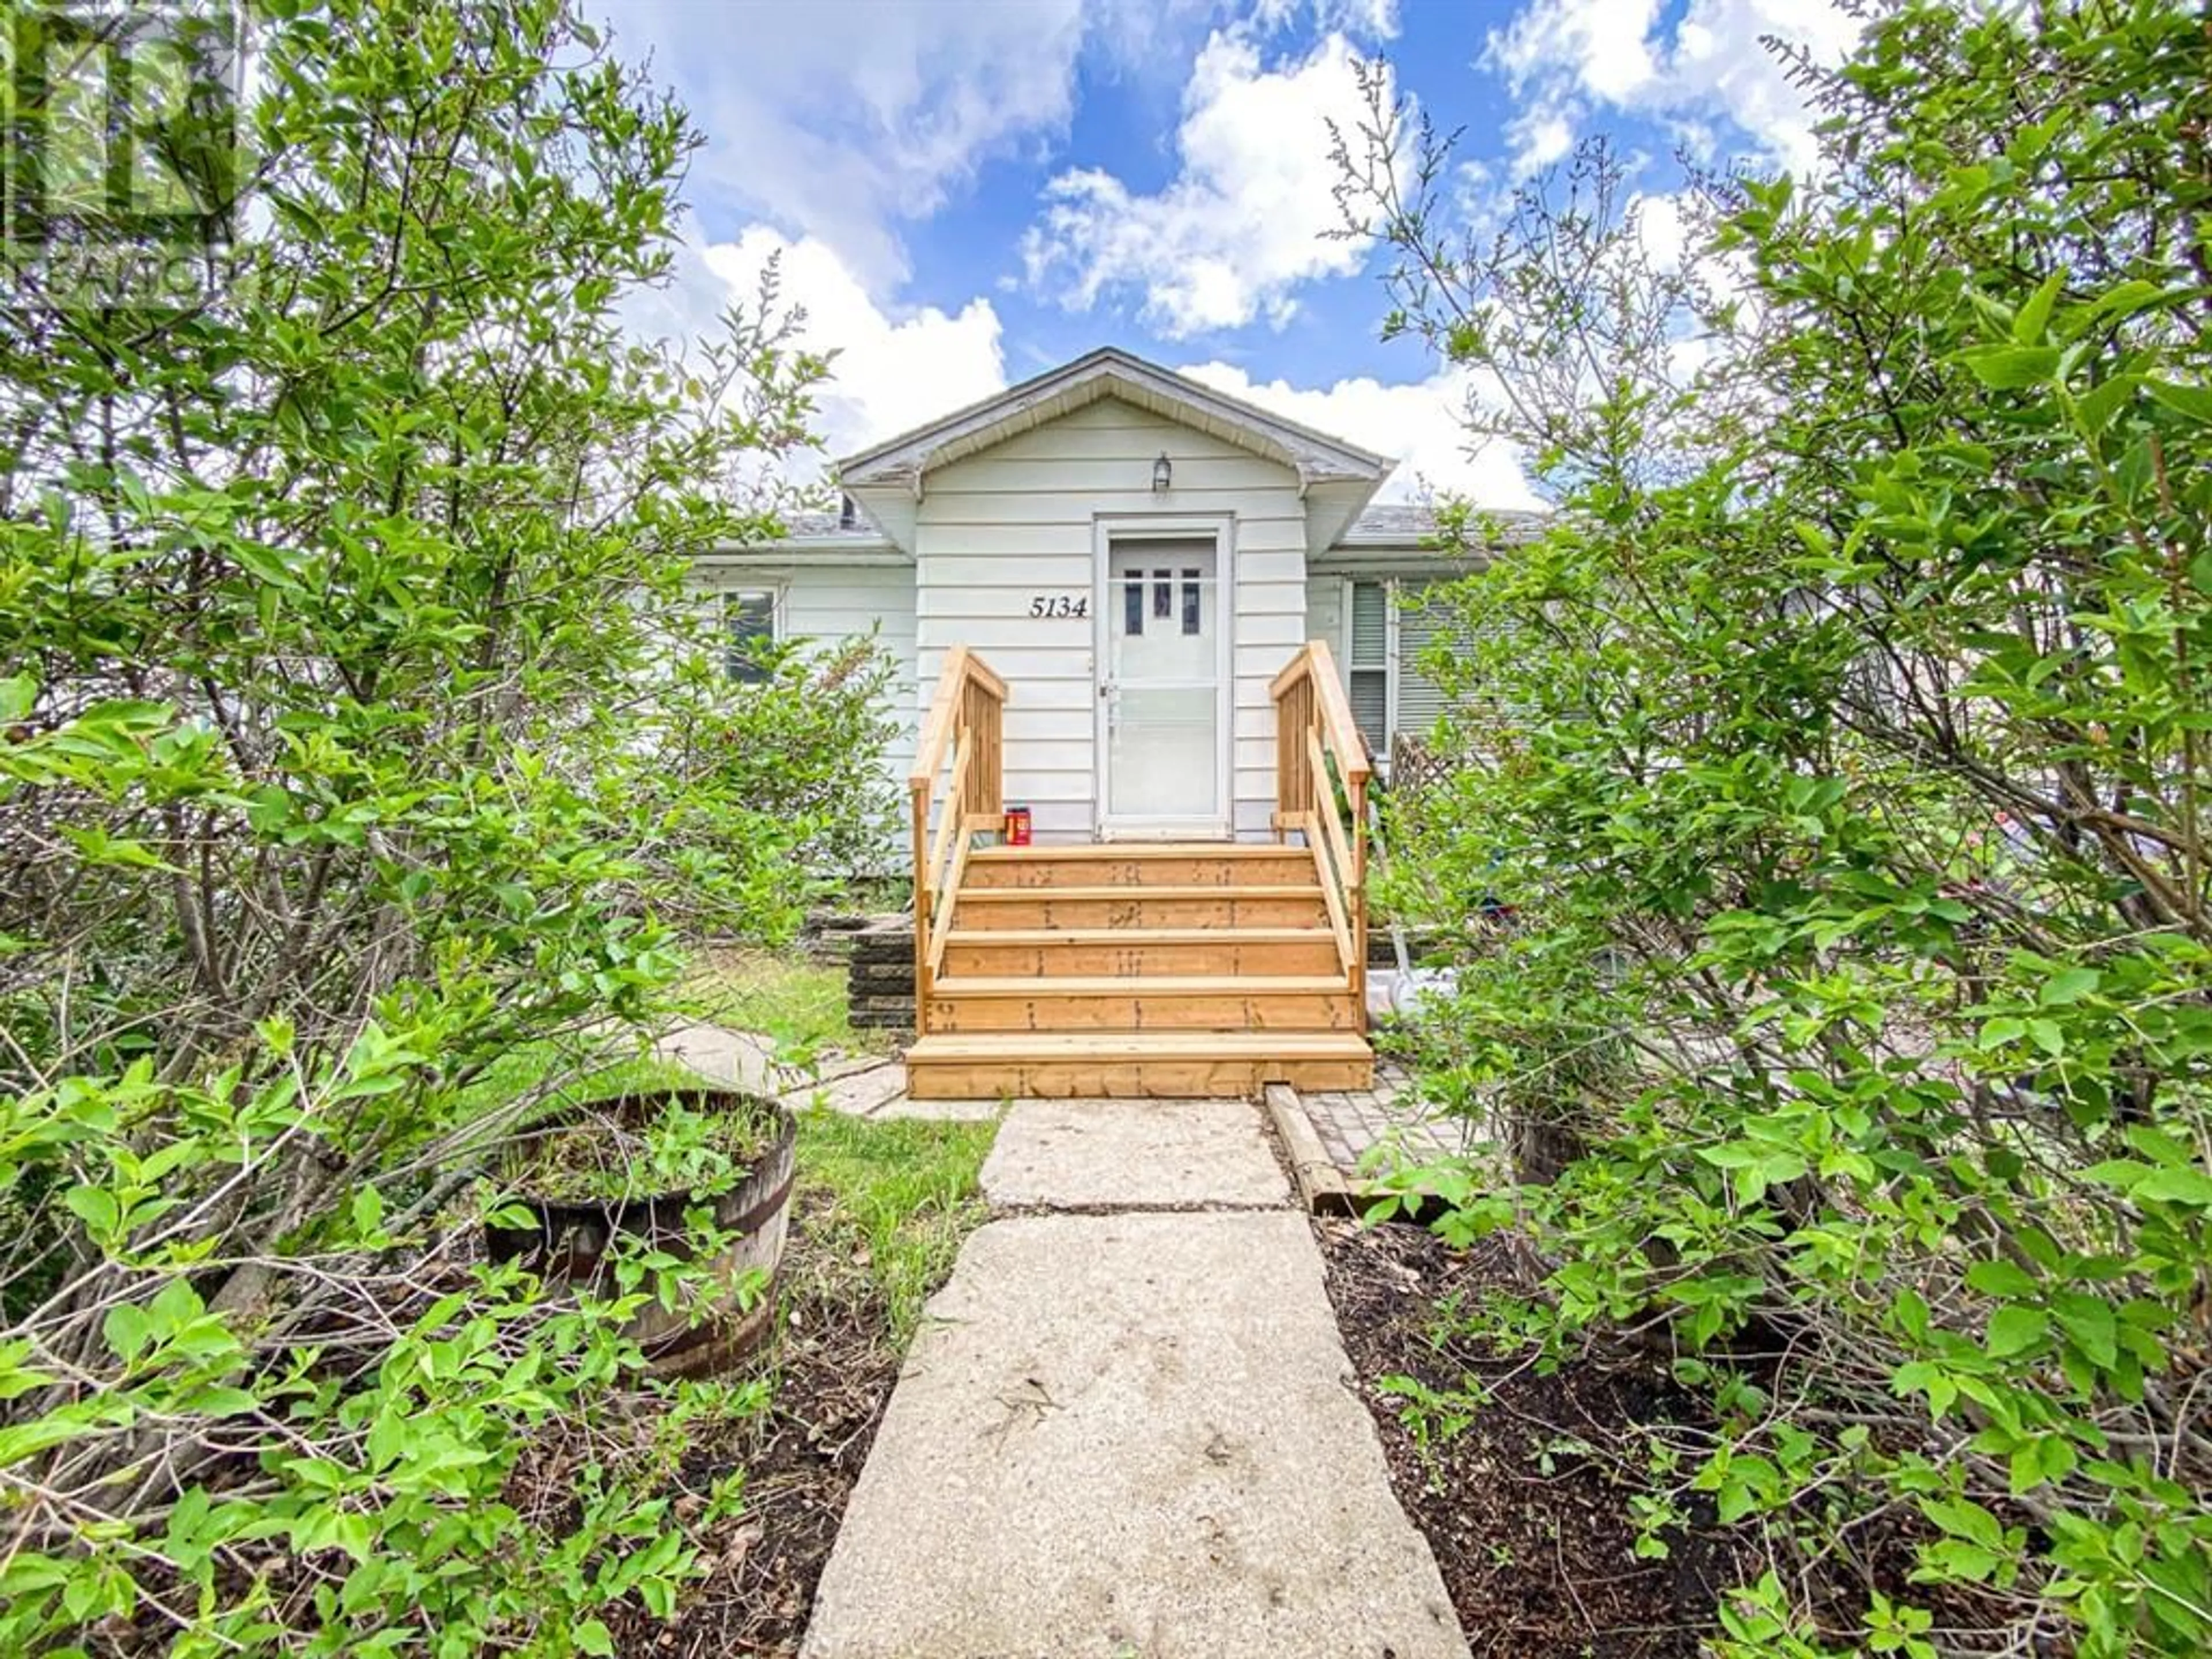 Cottage for 5134 49 Street, Olds Alberta T4H1H4